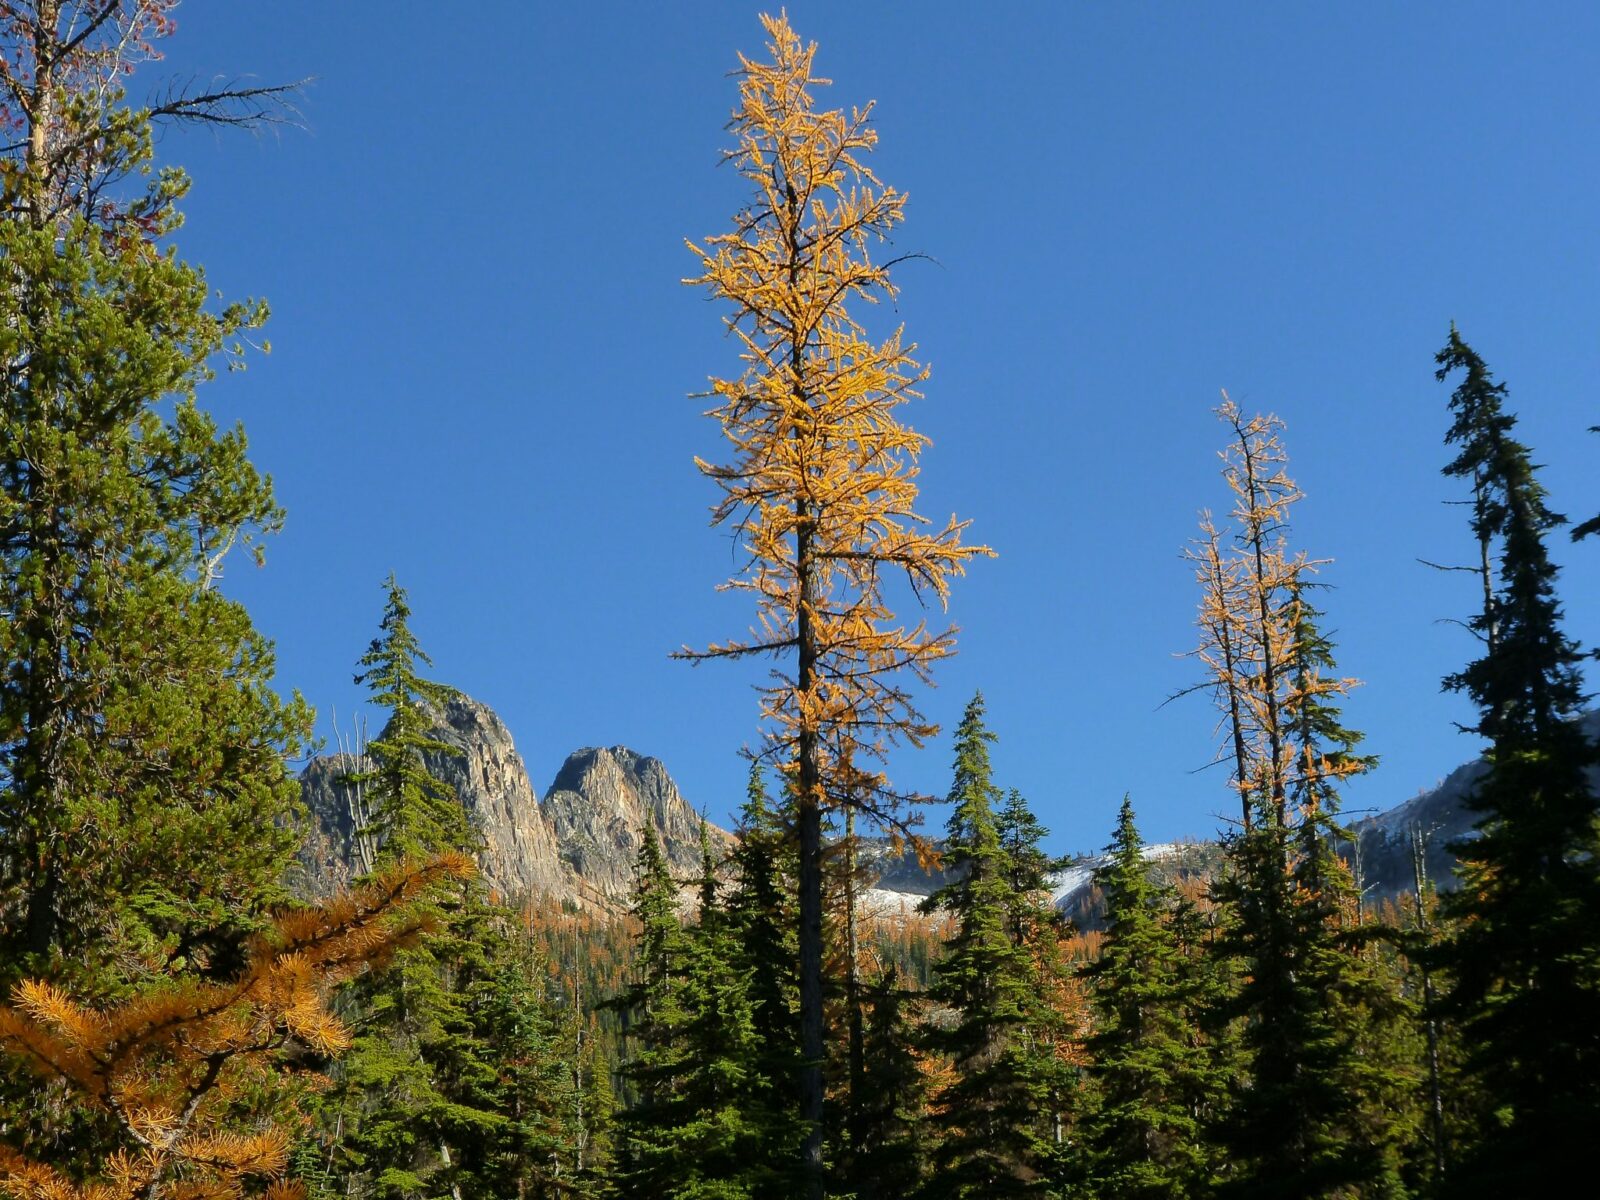 A single golden larch is surrounded by evergreen trees and more larches in the distance against the mountains